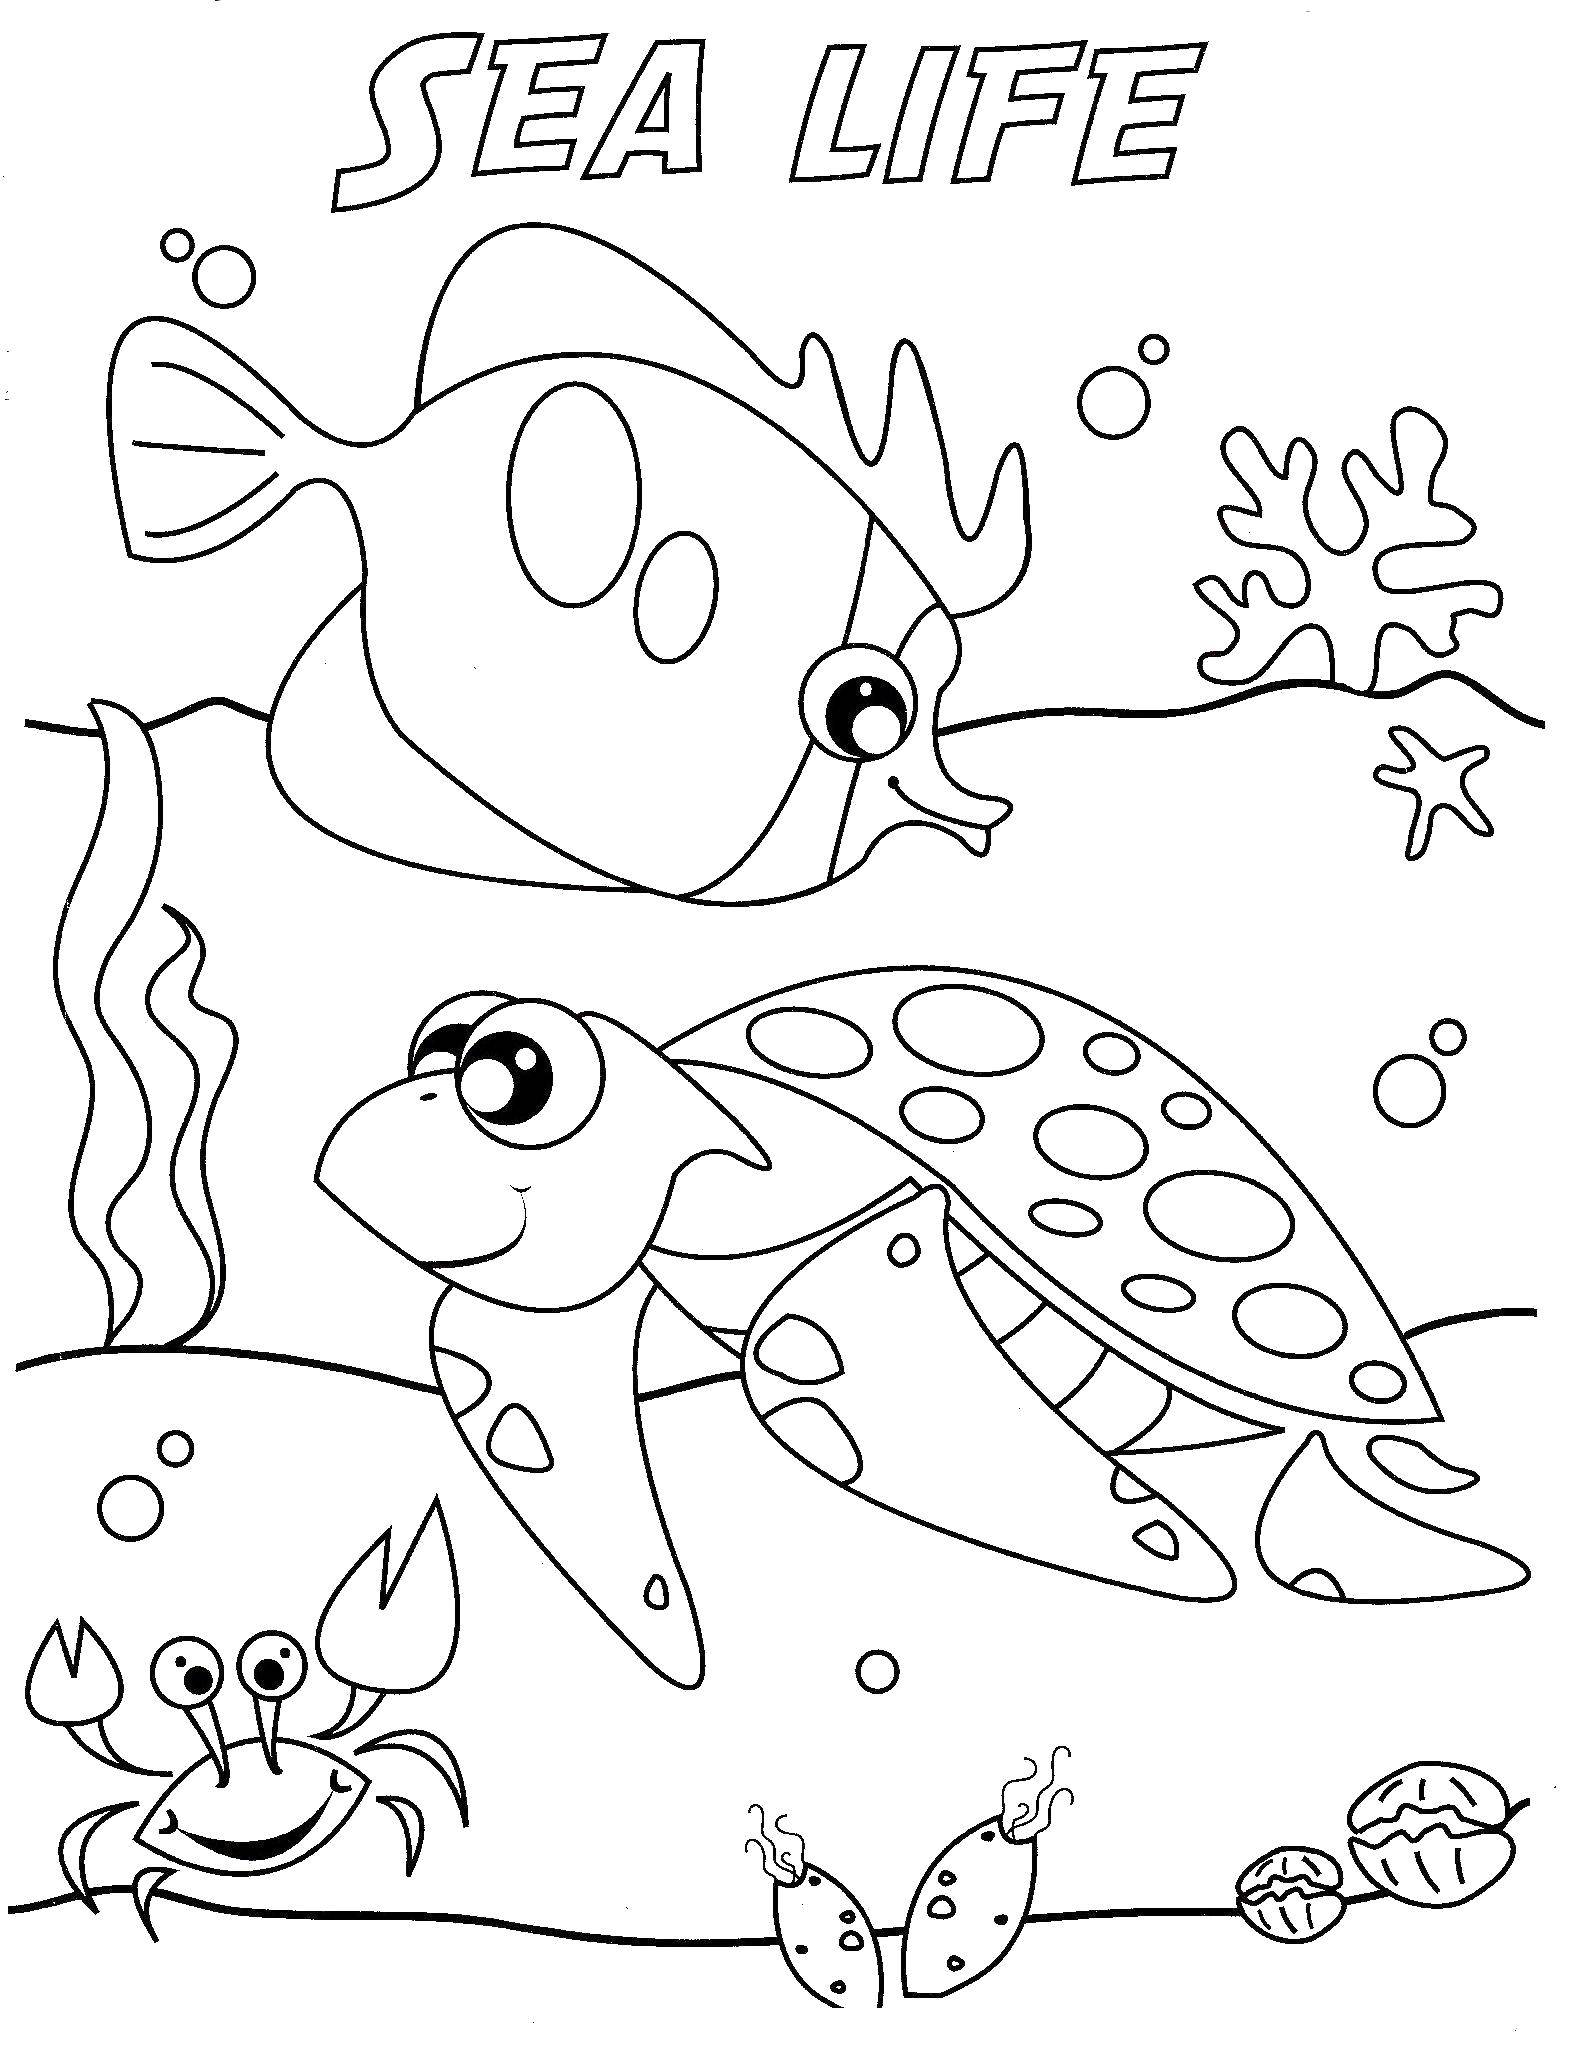 Coloring Marine life. Category Sea animals. Tags:  Underwater world, fish, turtle.